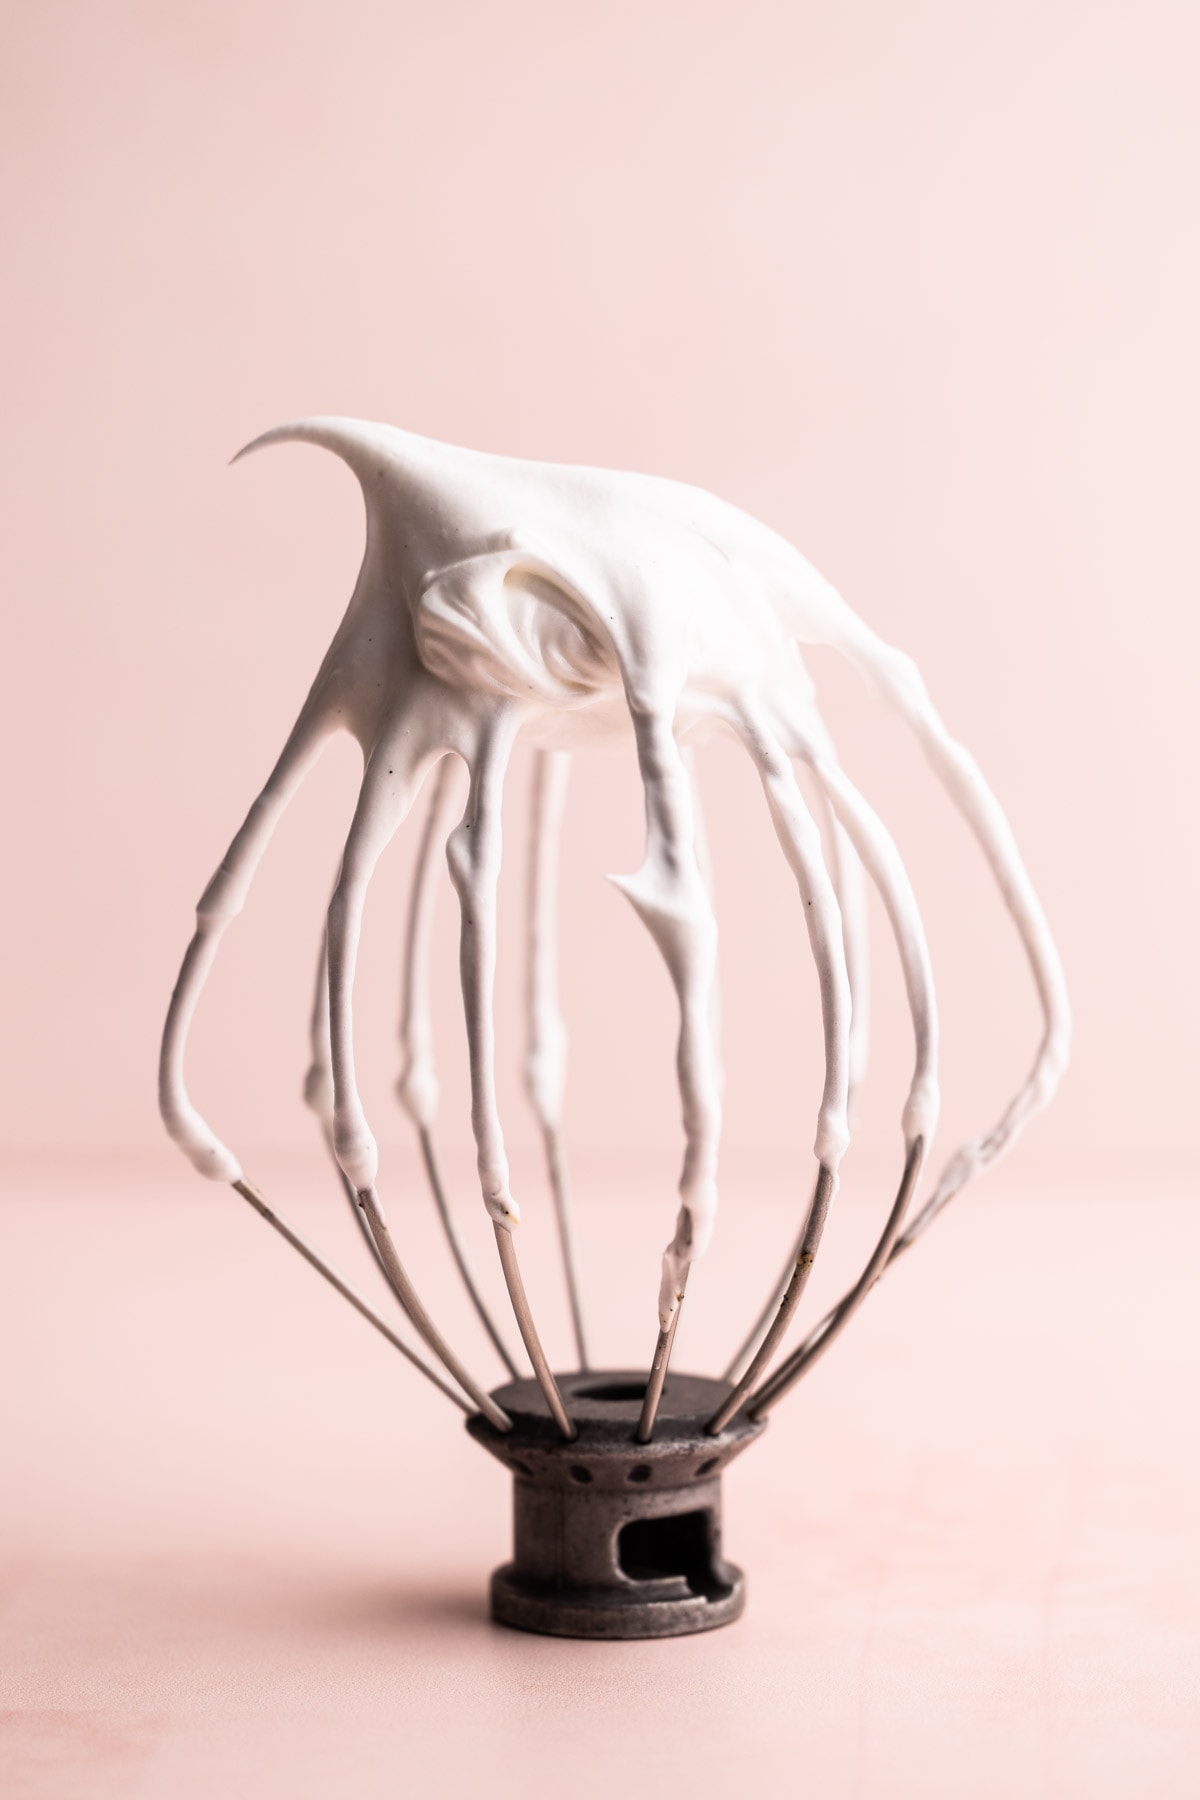 Swiss meringue on a stand mixer whisk.